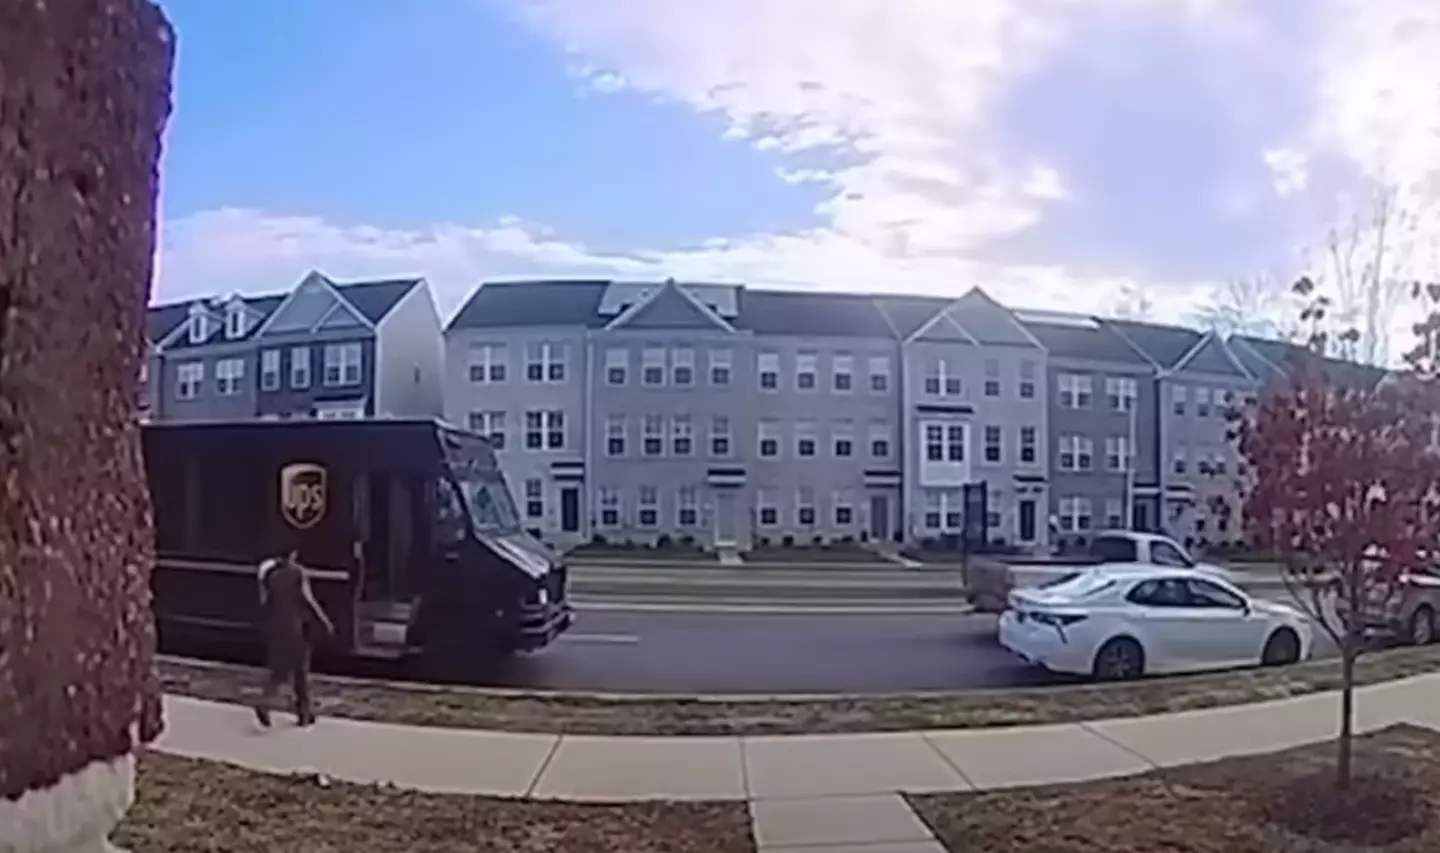 A Ring doorbell camera picked up the moment the UPS truck was stolen.